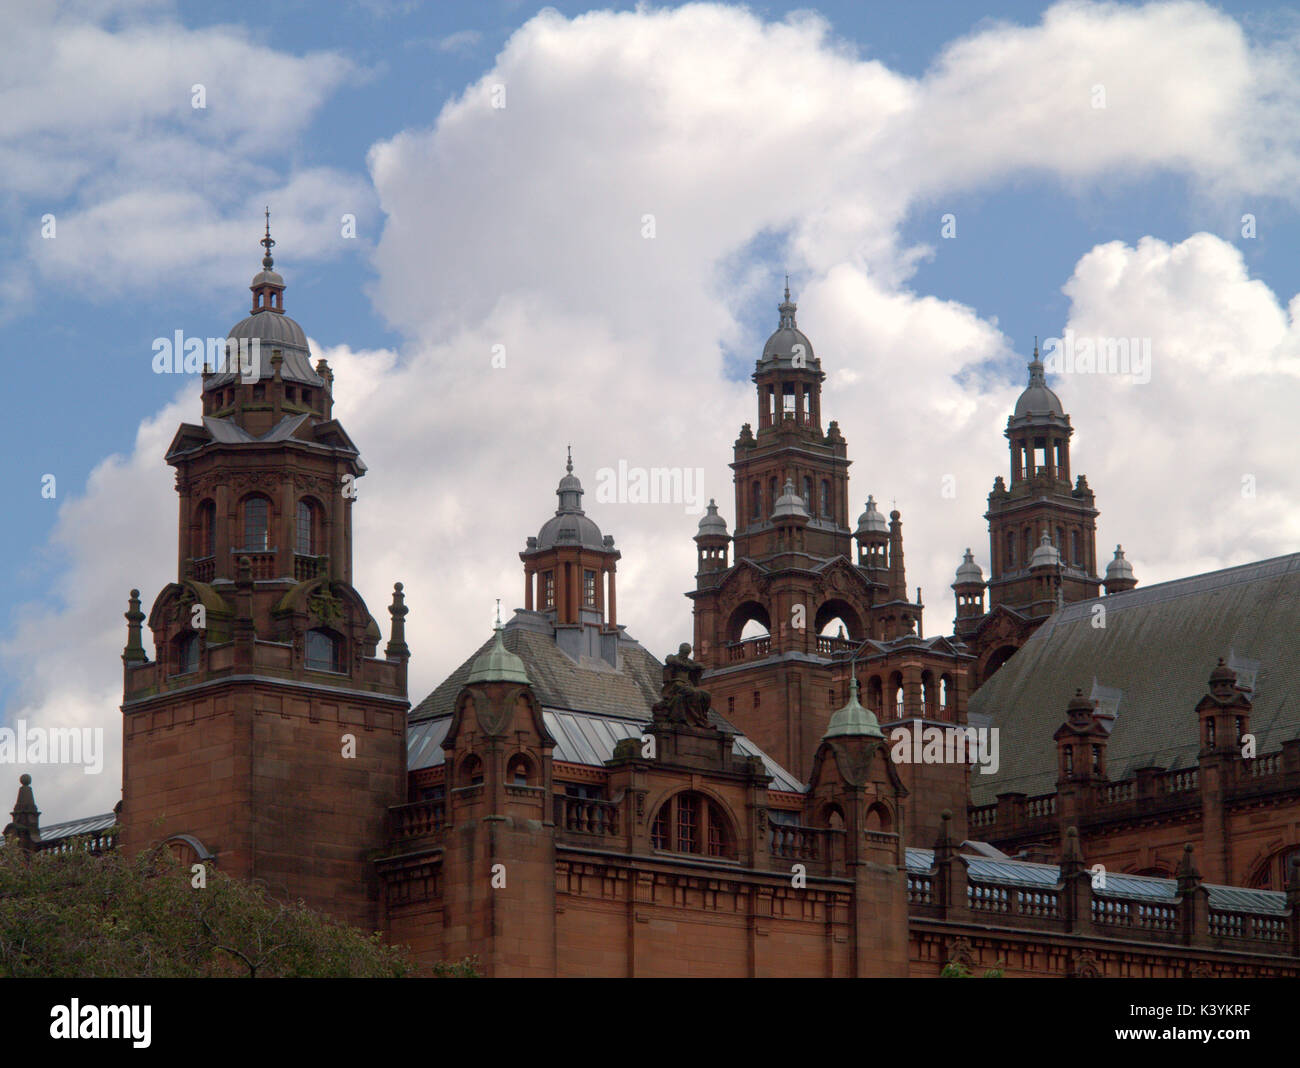 Kelvingrove Art Galleries and Museum roof with towers Stock Photo